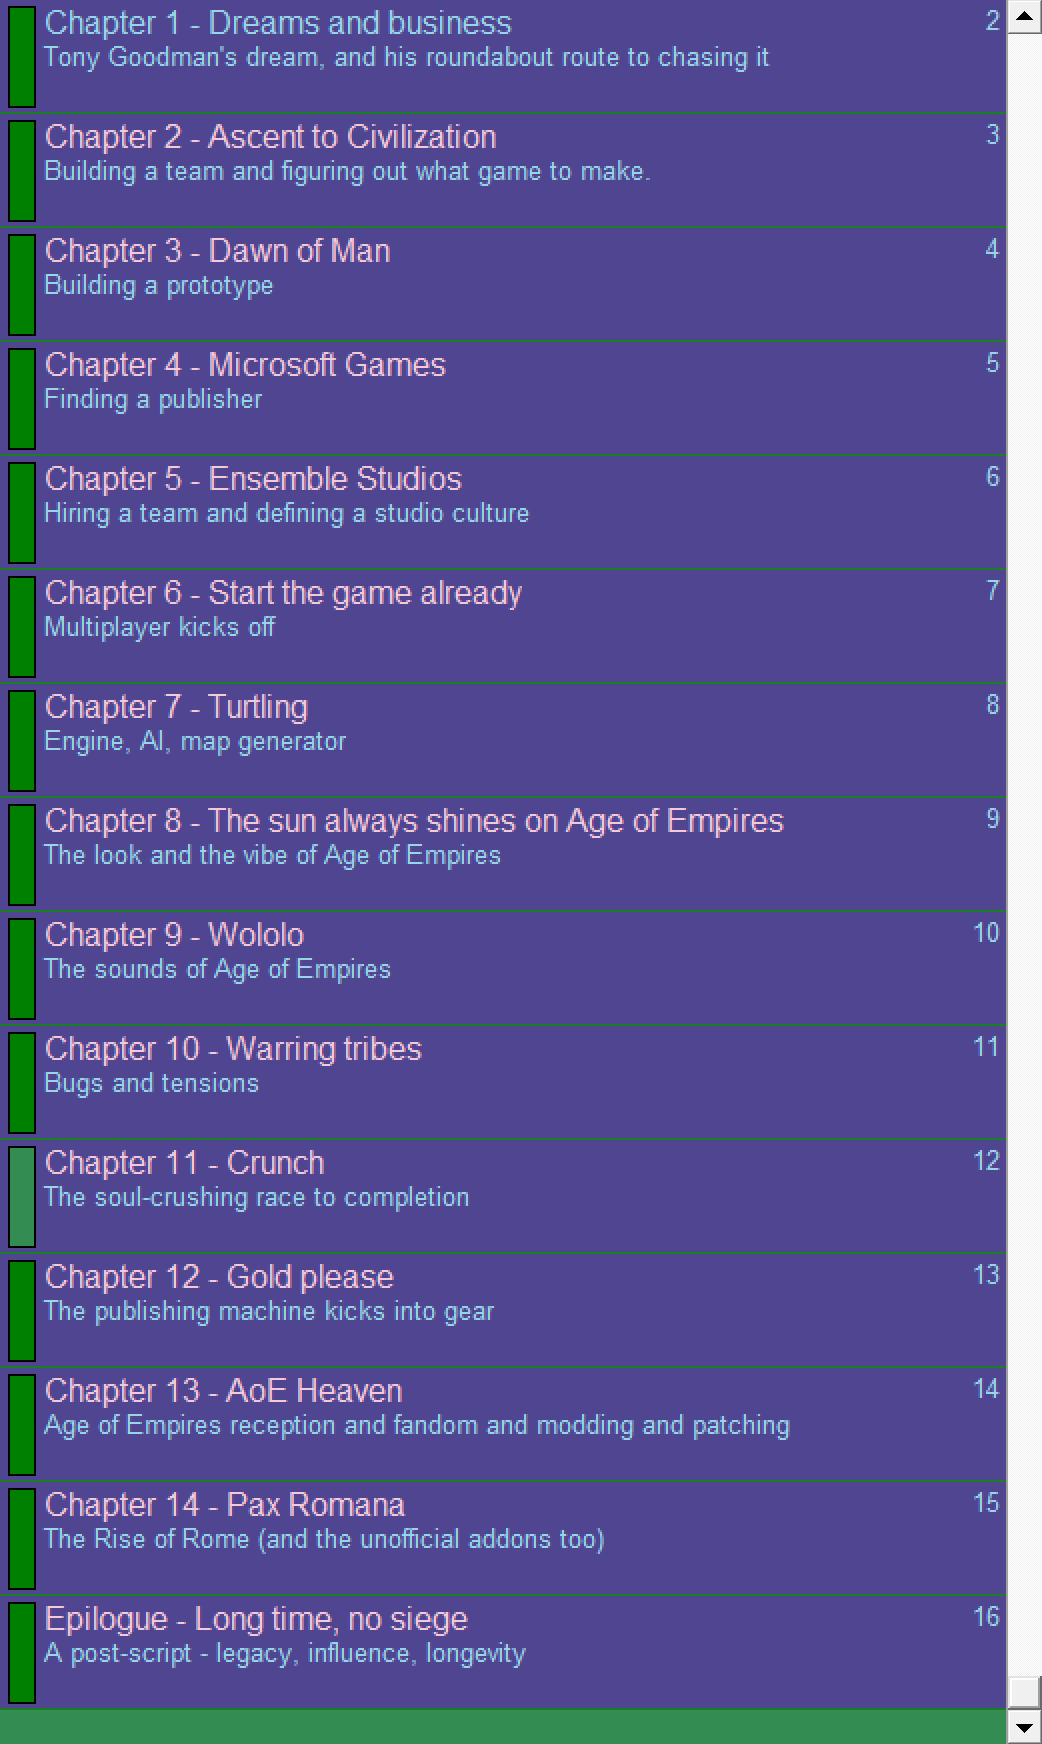 Chapter listing for the draft manuscript of my Age of Empires book.